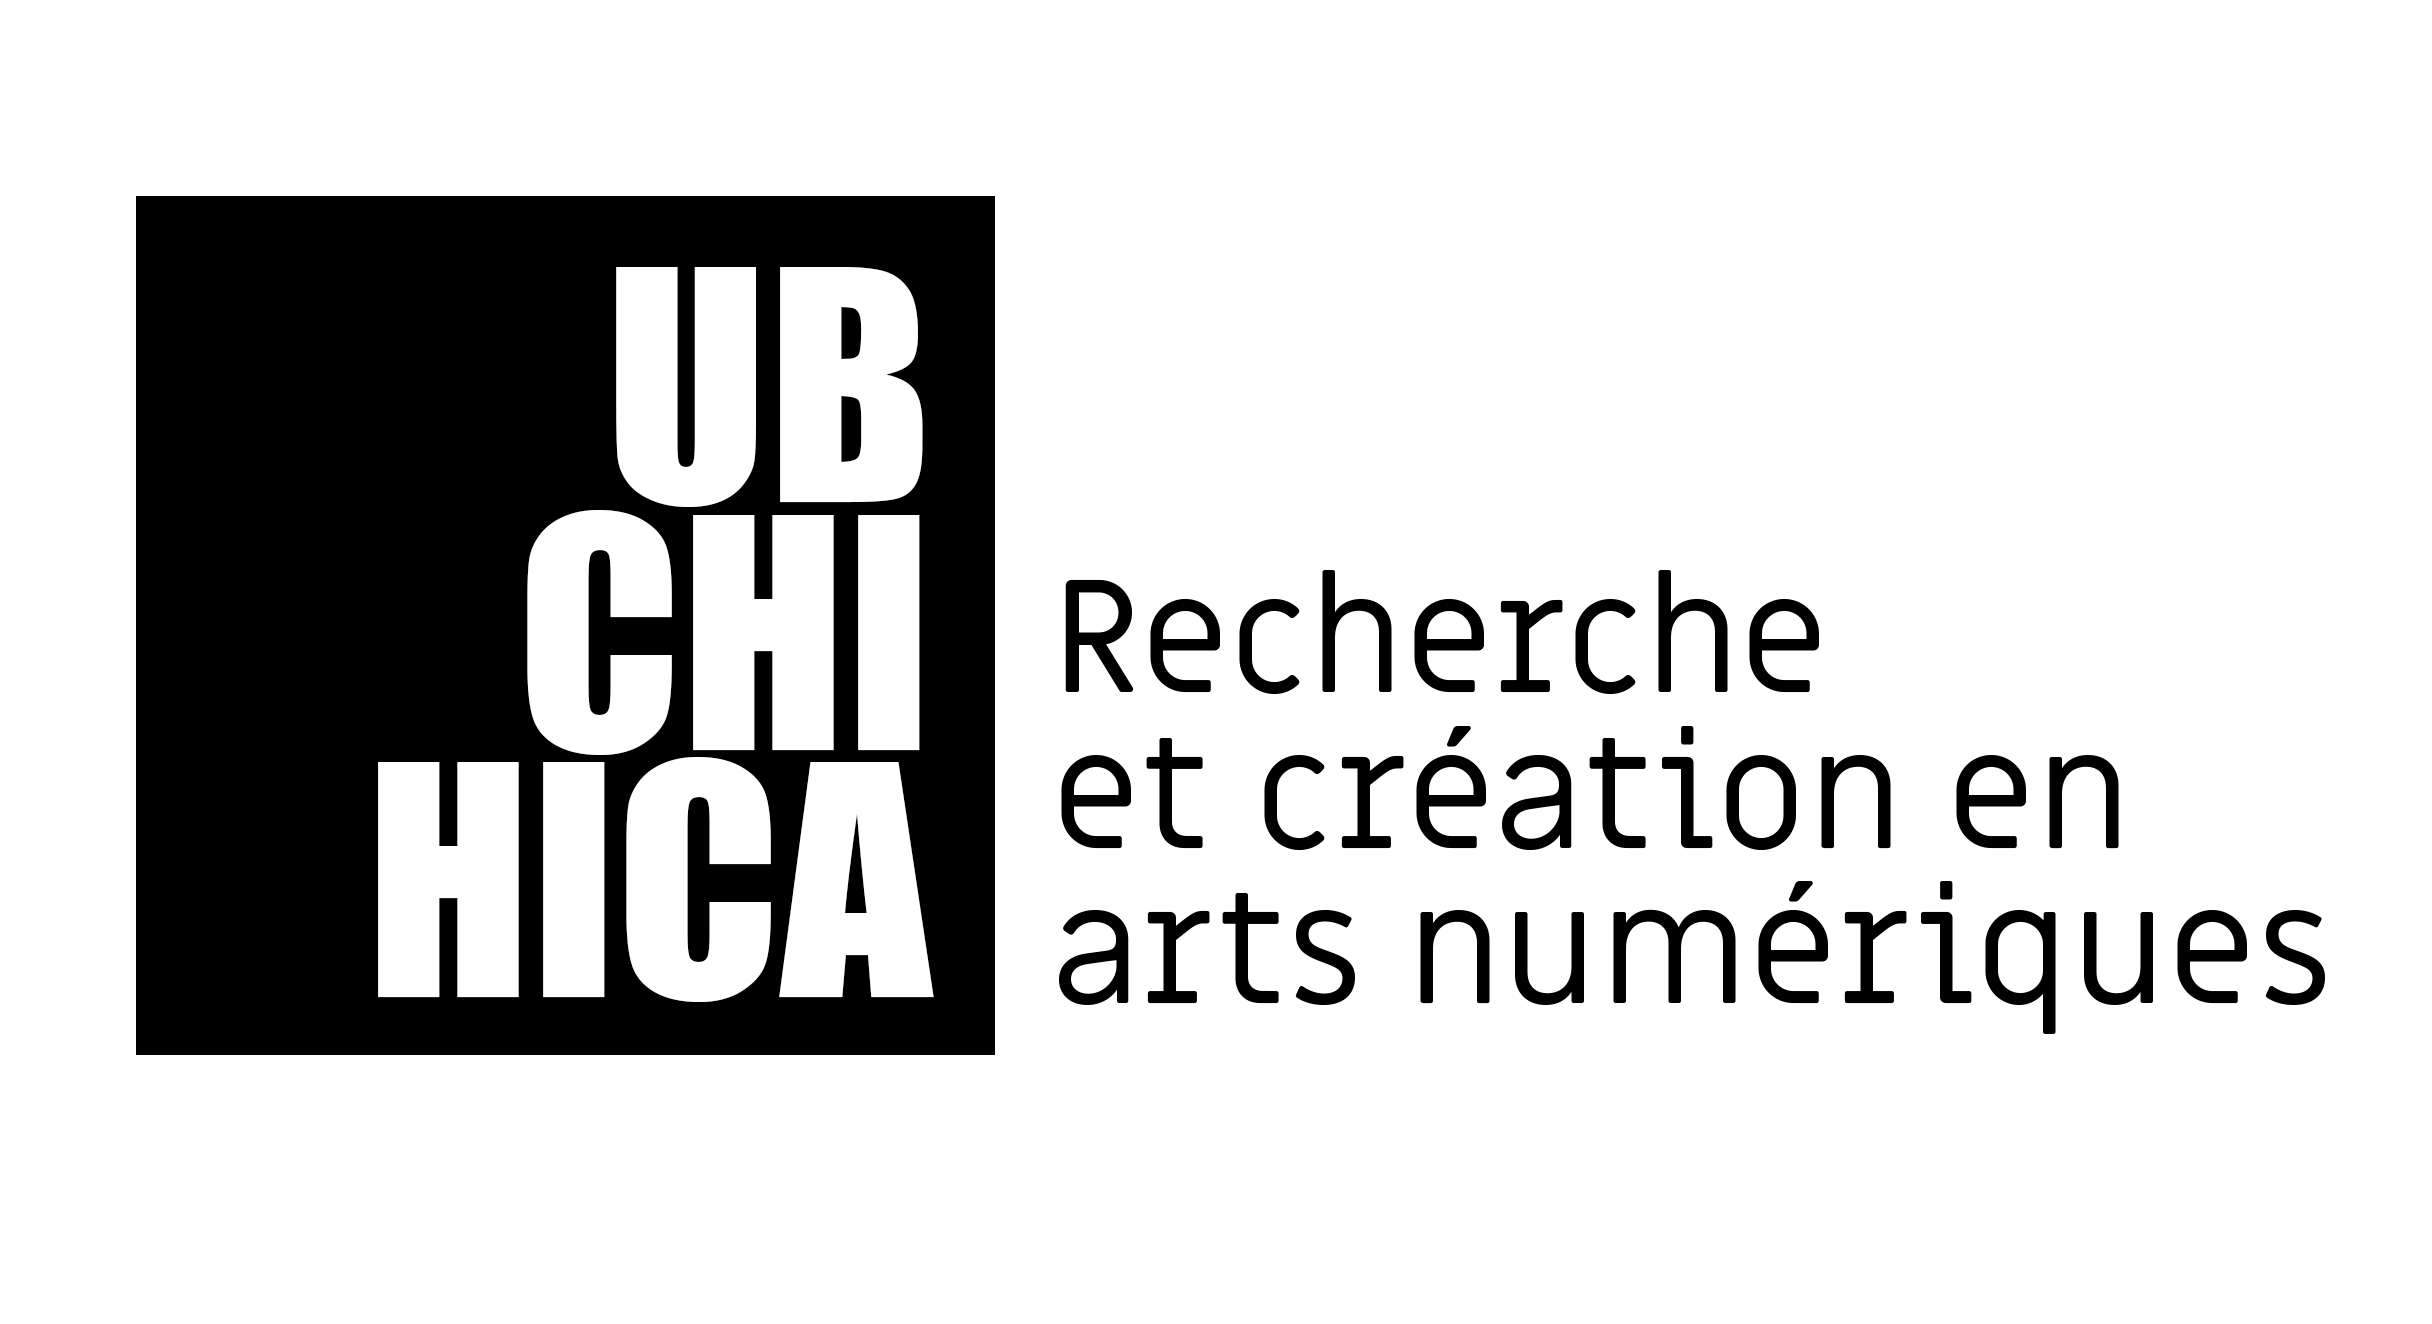 Ubchihica